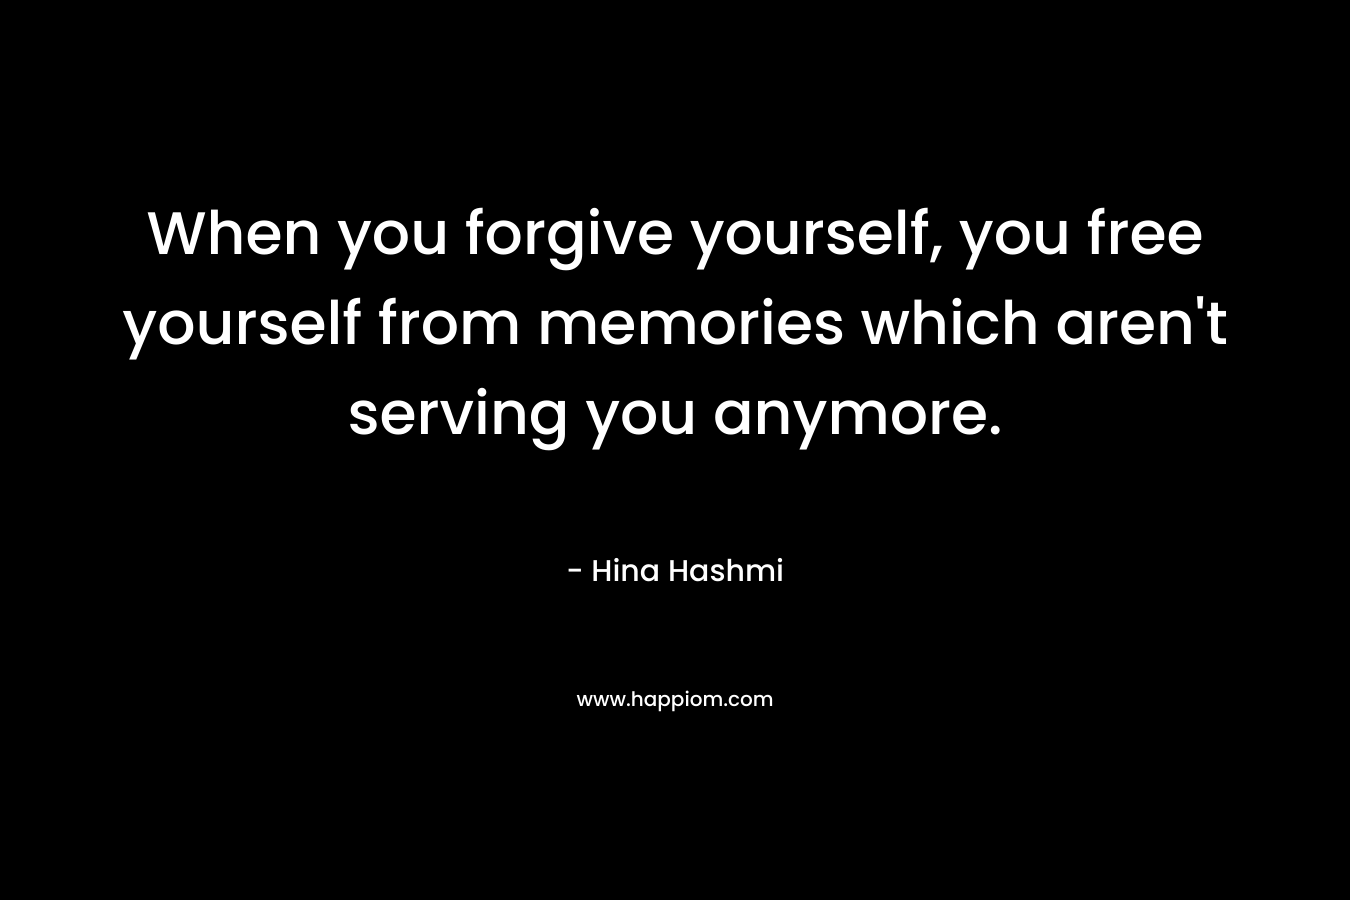 When you forgive yourself, you free yourself from memories which aren't serving you anymore.